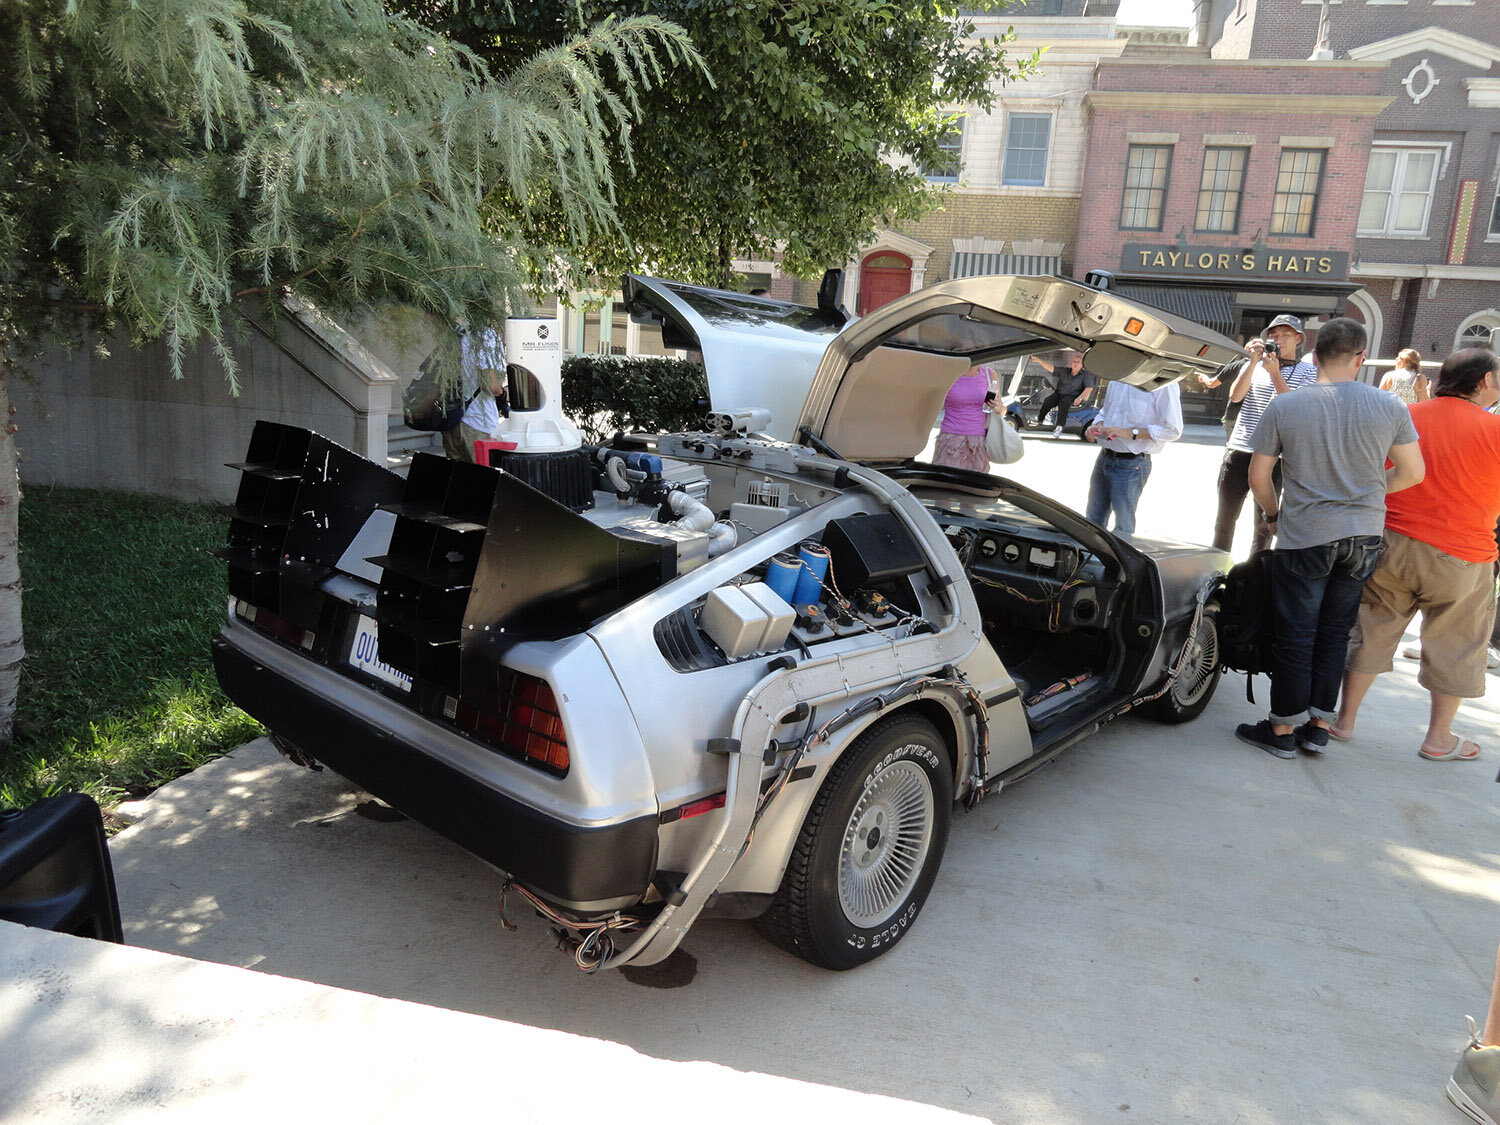  The "A" DeLorean Time Machine on display at Universal Studios for the Nike Mag press premiere September 8, 2011 (photo by Stephen Clark, ©2011, To Be Continued, LLC) 